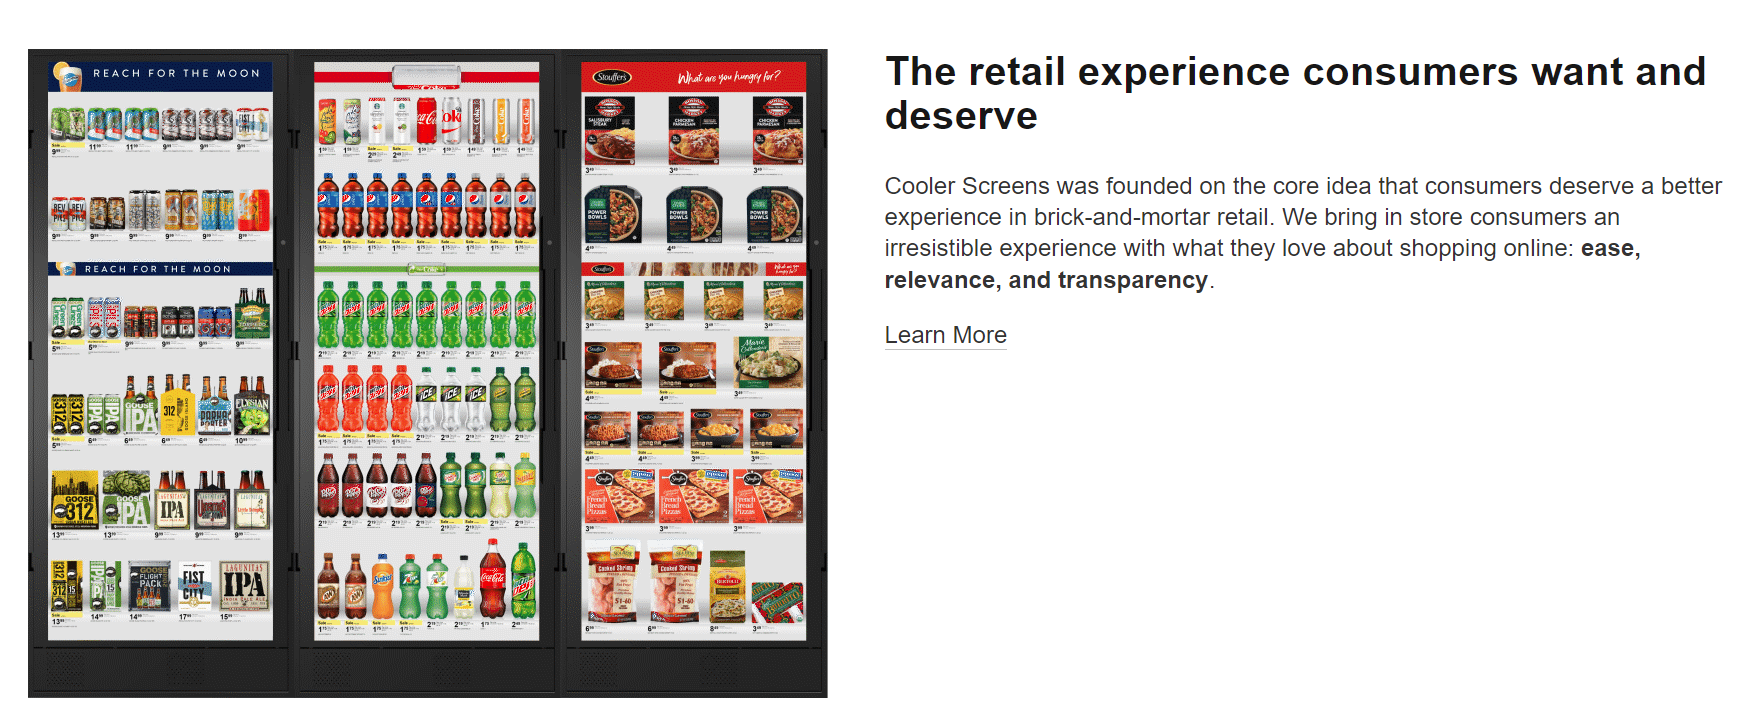 A screenshot of coolerscreens.com. A retail store refridgerator is shown with a large screen occupying the whole front of each refridgerator door. The screen shows idealized photos of products that are presumably inside the refridgerator. Some of the screens have banner ads at the top highlighting particular brands.